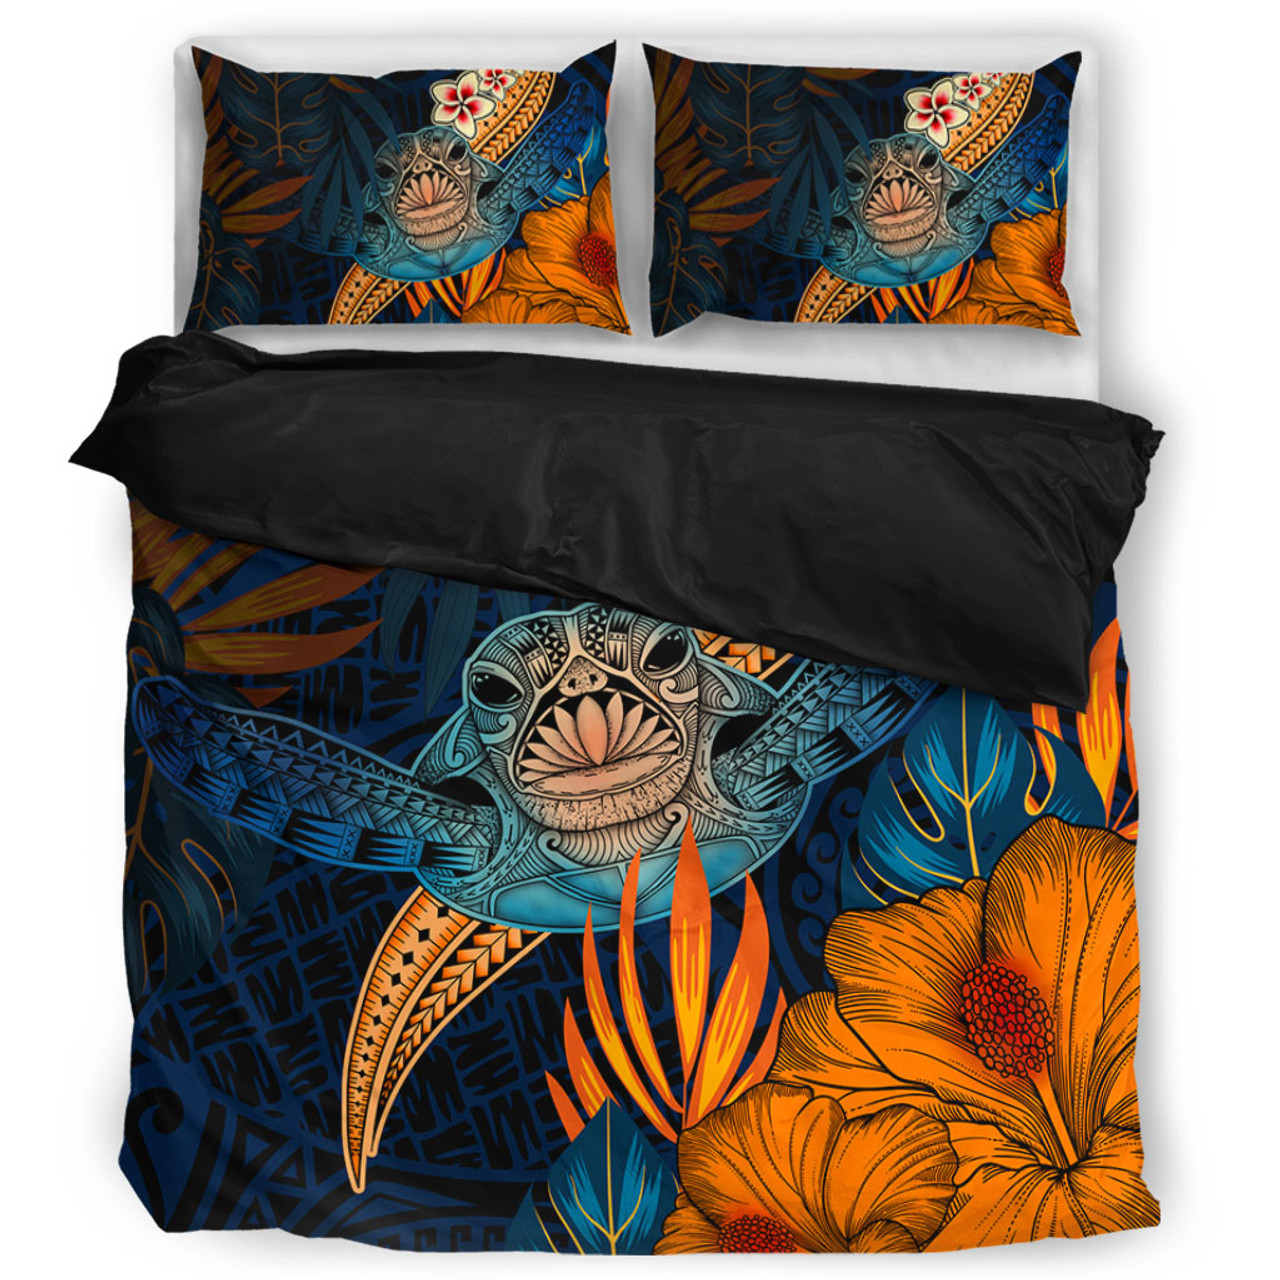 Hawaii Bedding Set Turtle Design With Hibiscus Tropical Style